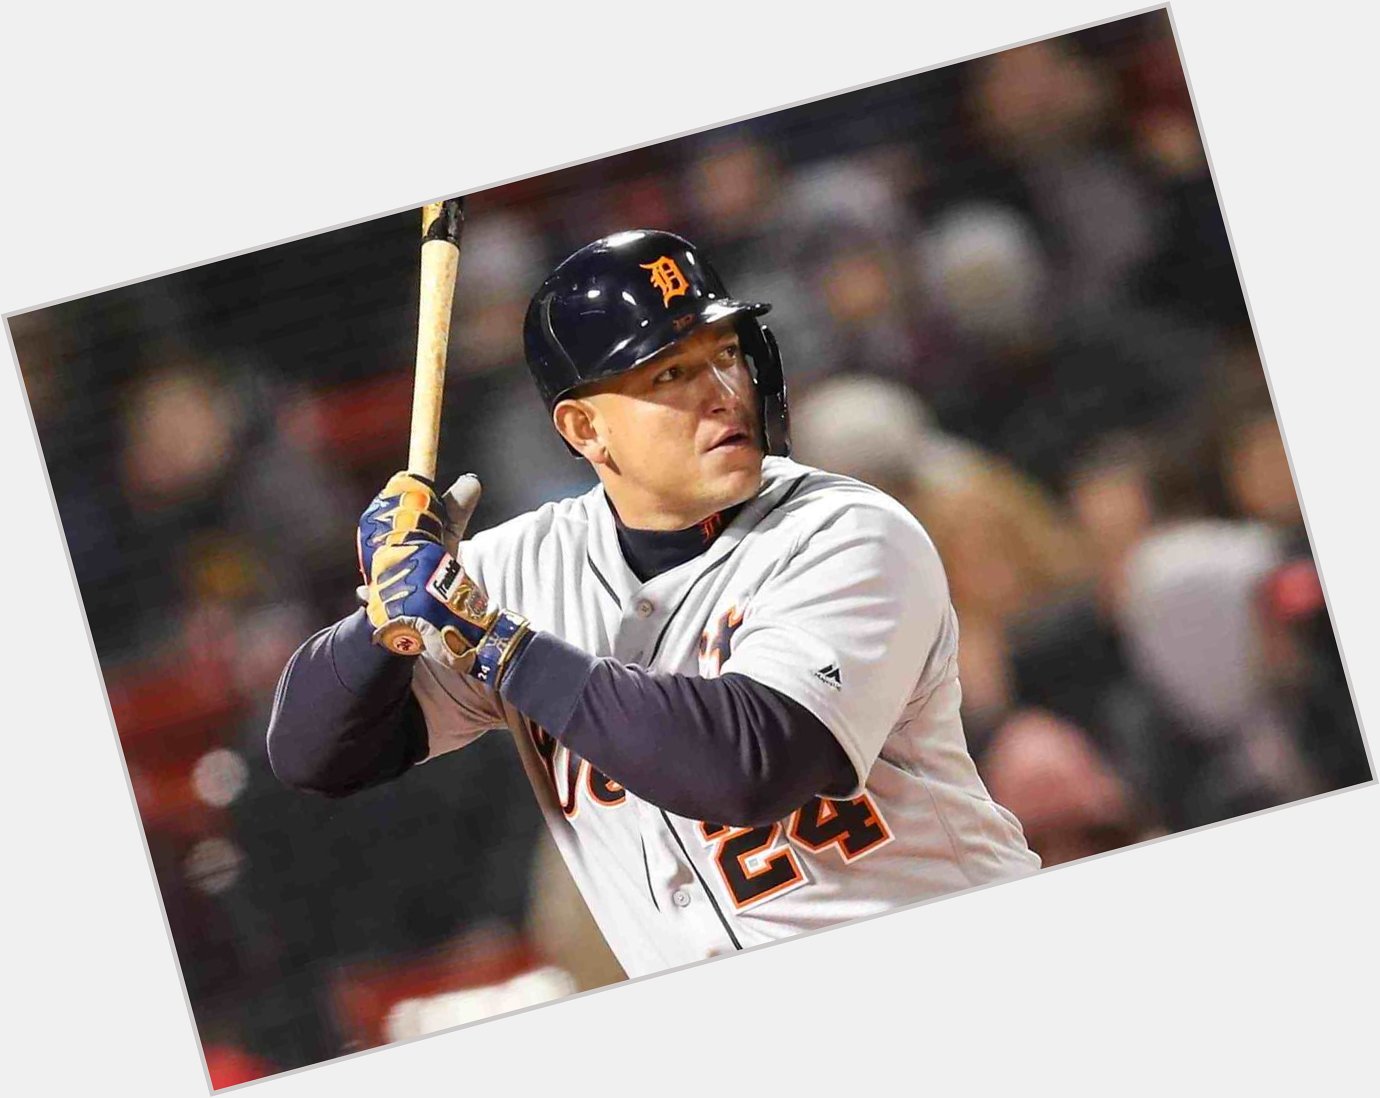 Happy 37th bday Miguel Cabrera, who is 185 hits shy of 3000 and 23 home runs shy of 500. 